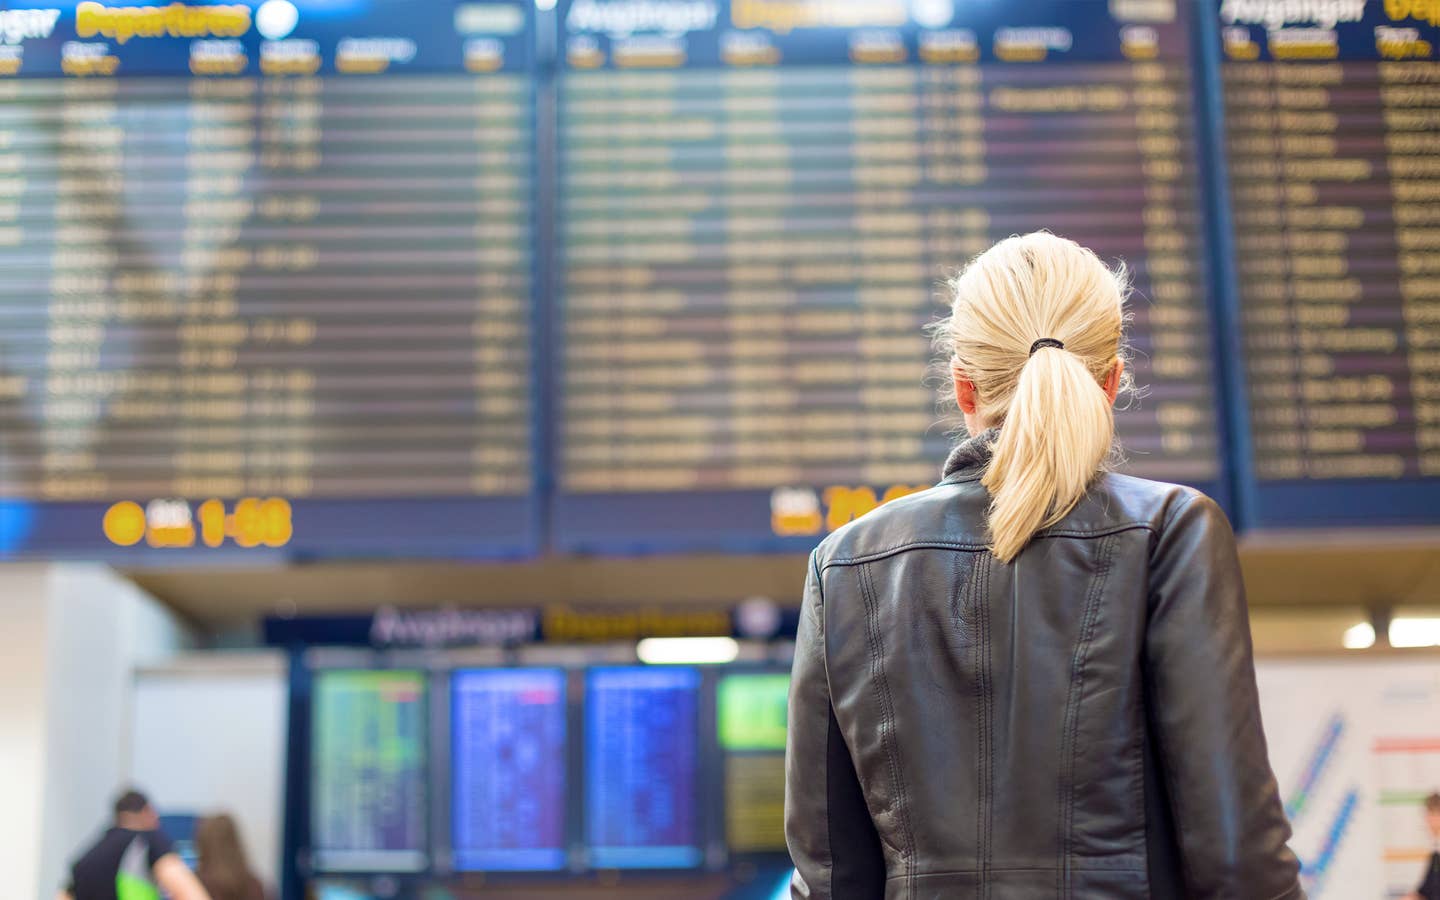 A blonde woman faces an airport Departure board in the terminal while wearing a black leather jacket.